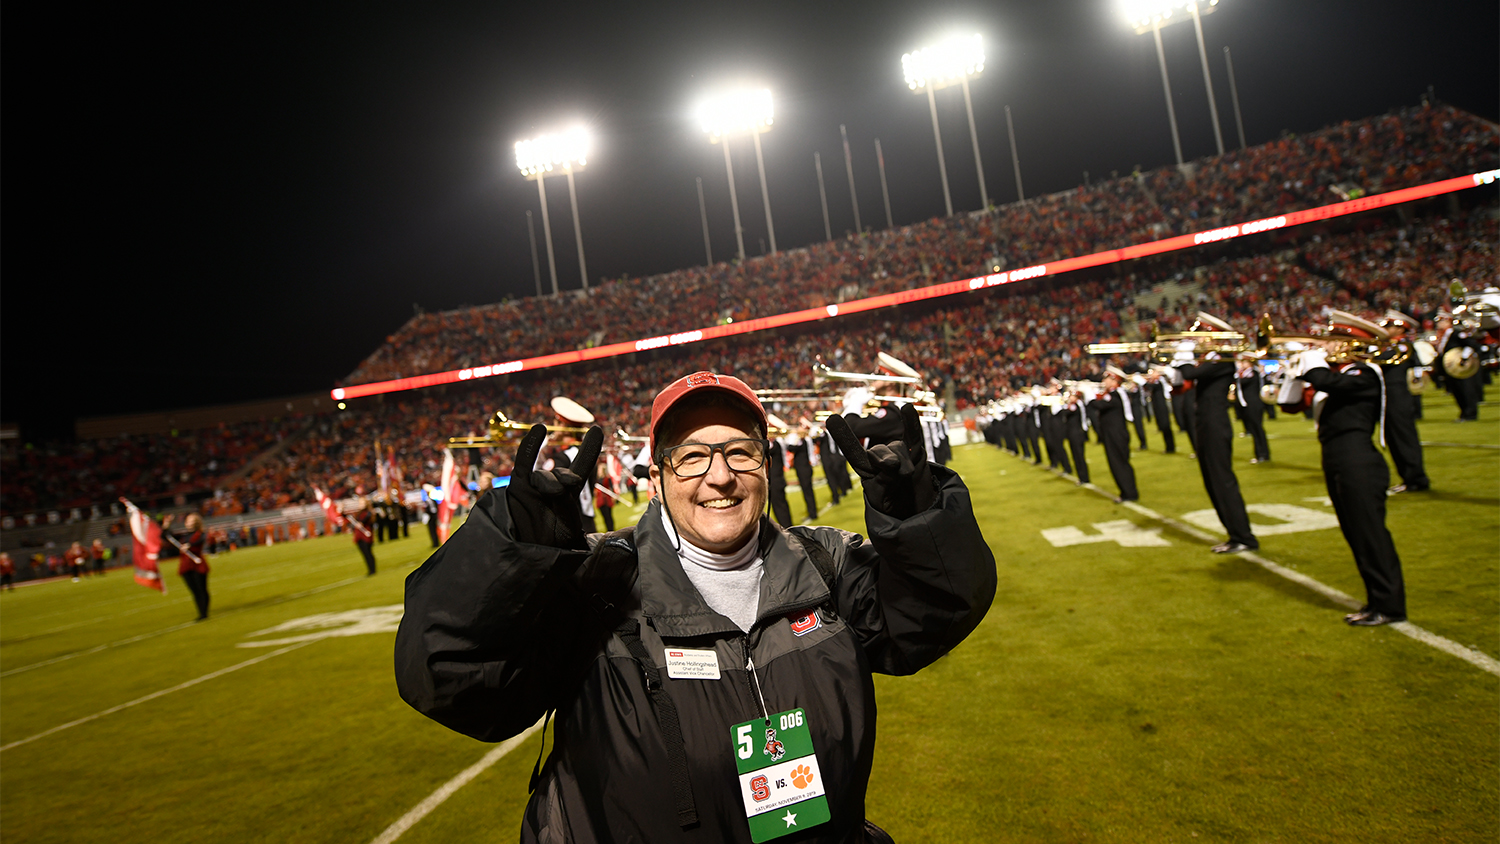 Justine Hollingshead making a wolfie sign on the field at an NC State football game